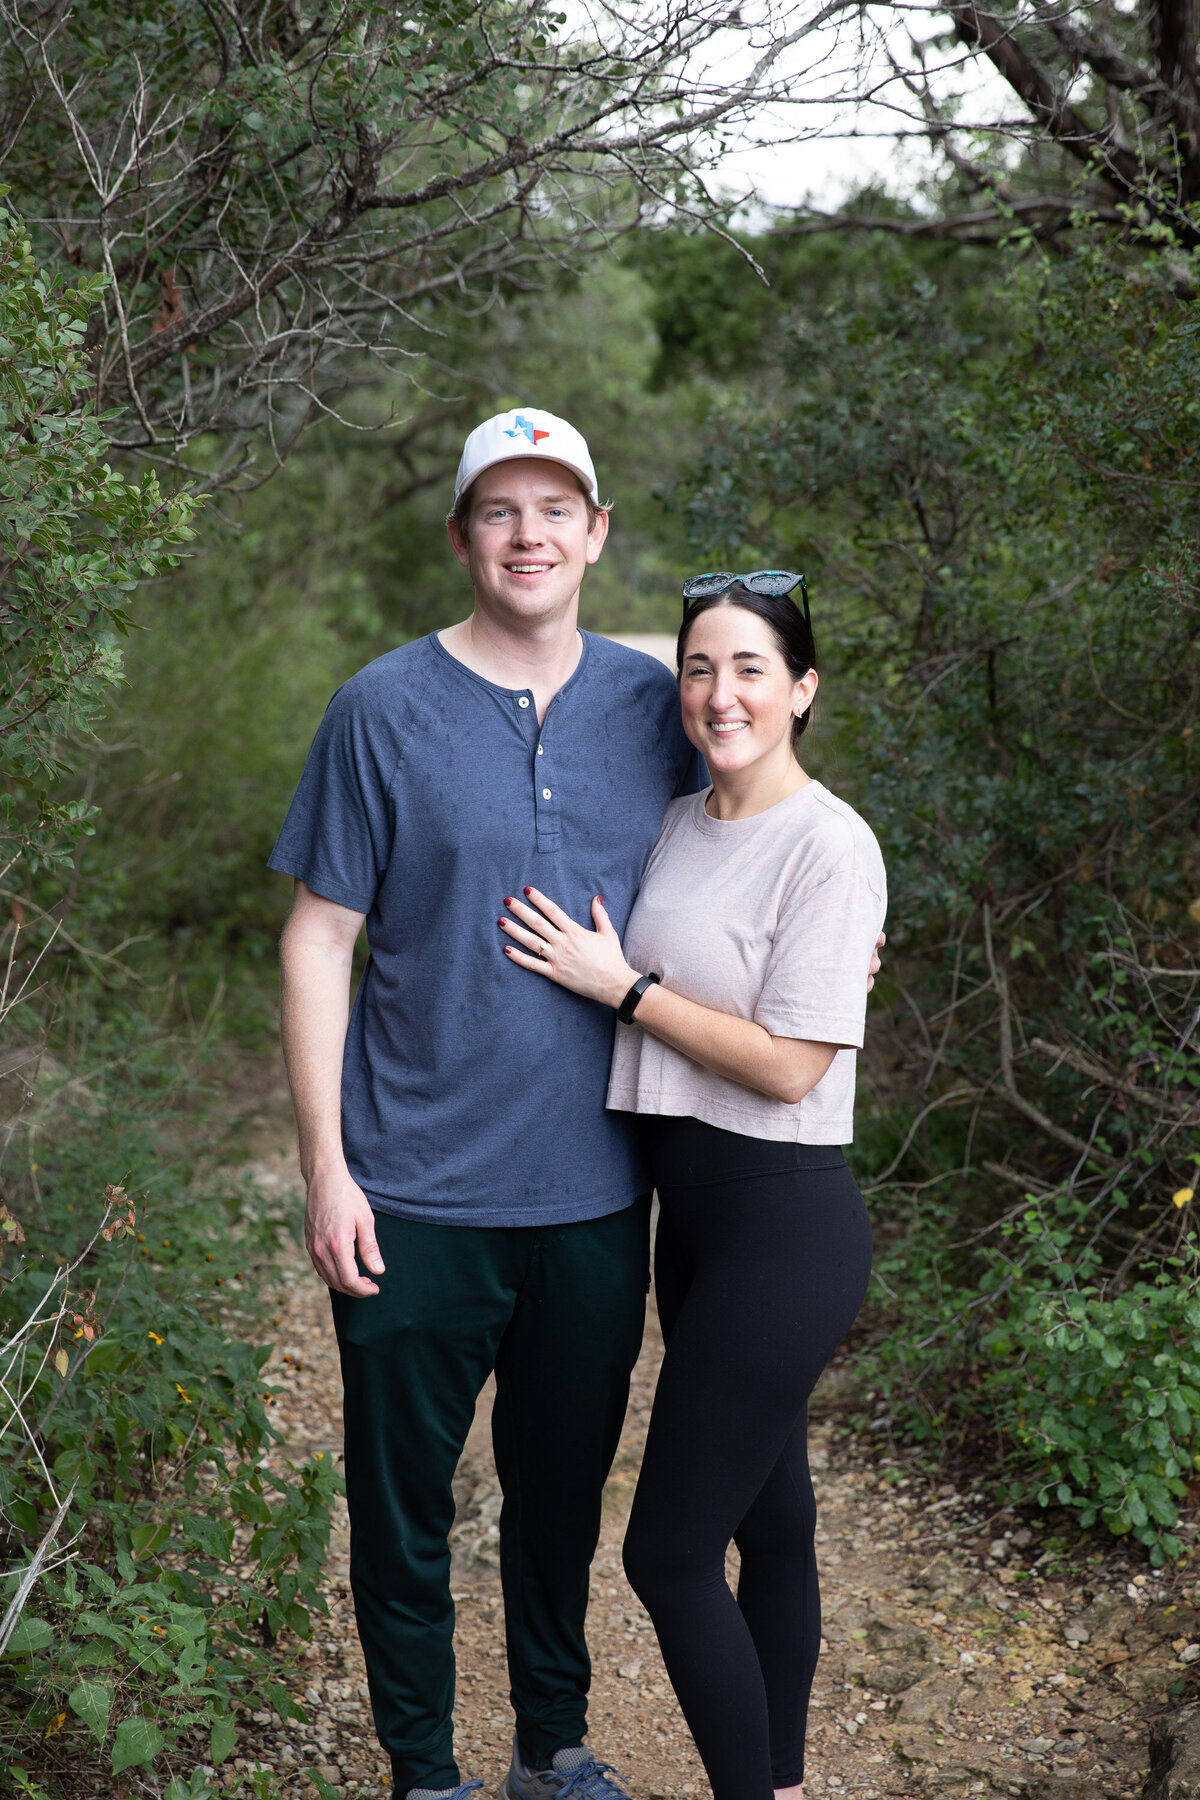 An Austin wedding photographer captures a man and woman standing on a trail in the woods.